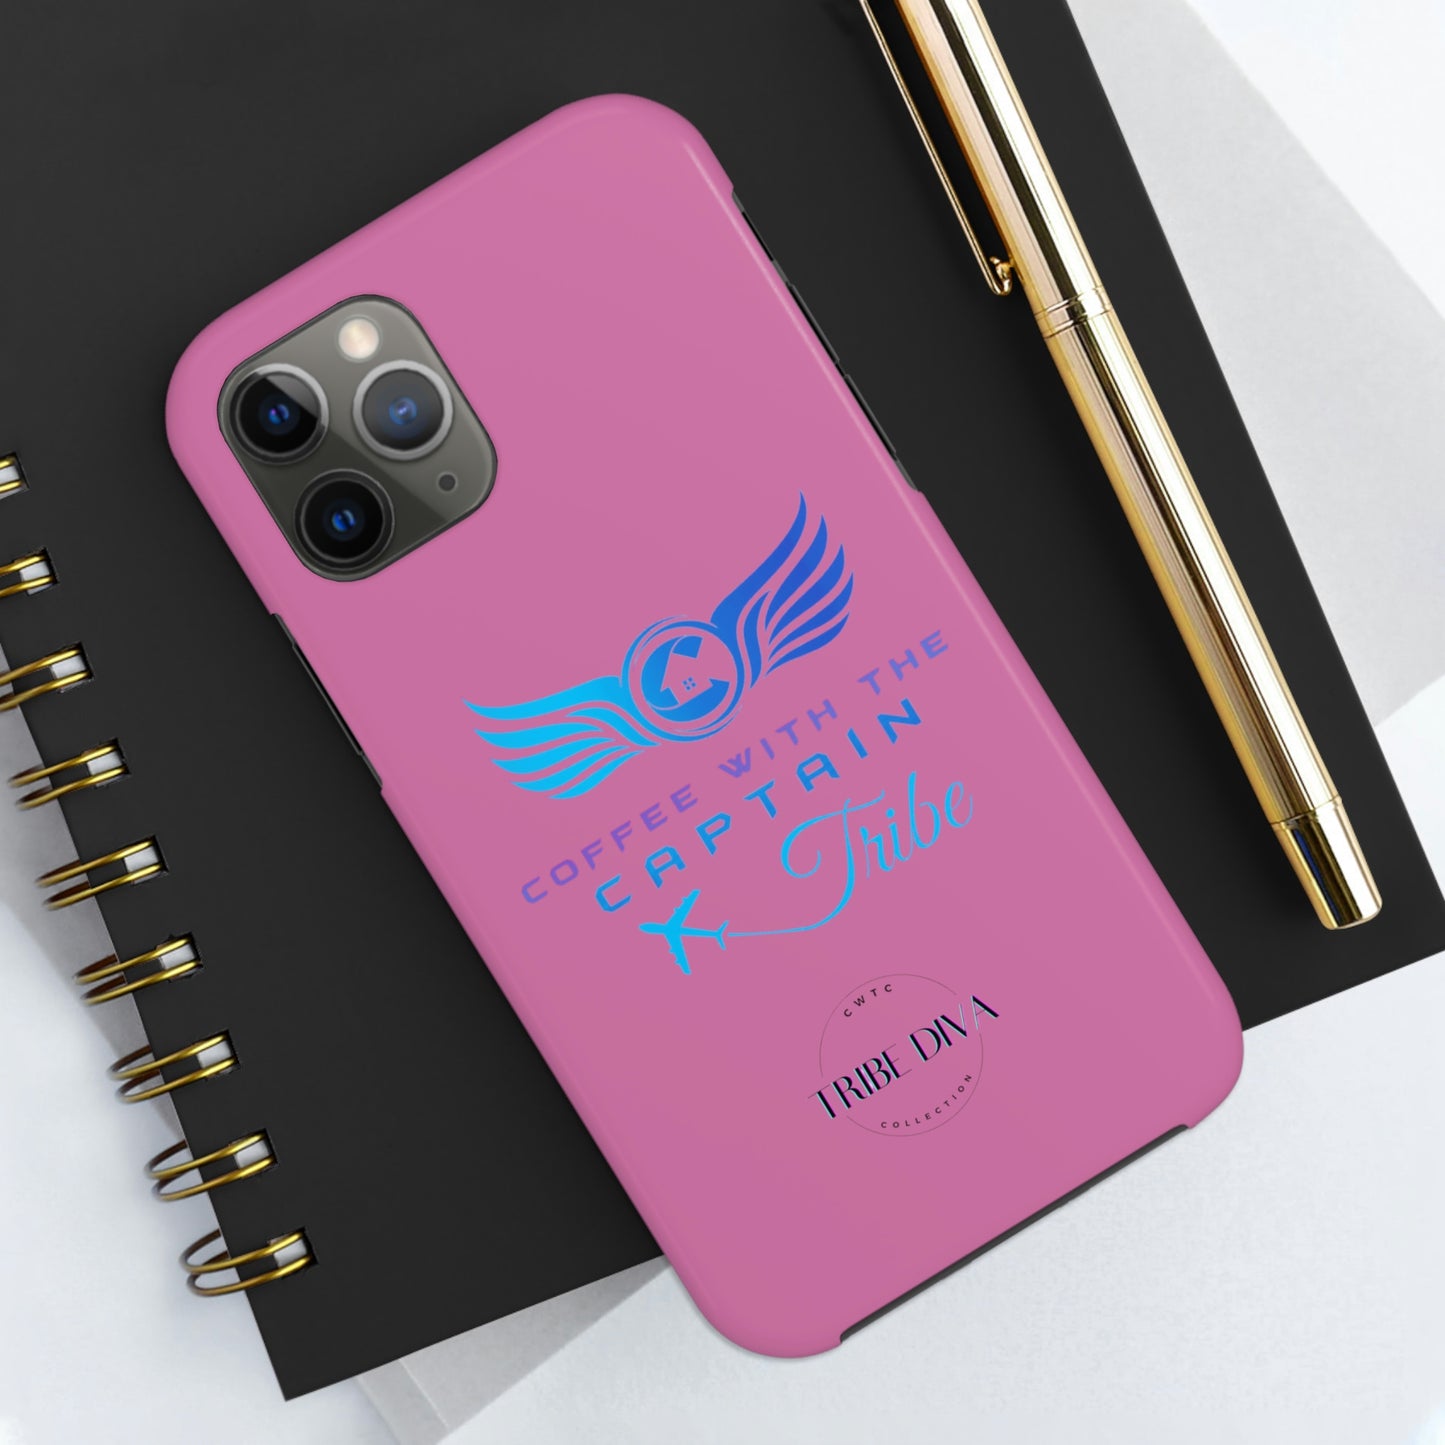 CWTC Tribe Diva Light Pink Tough iPhone Cases (Various Models)